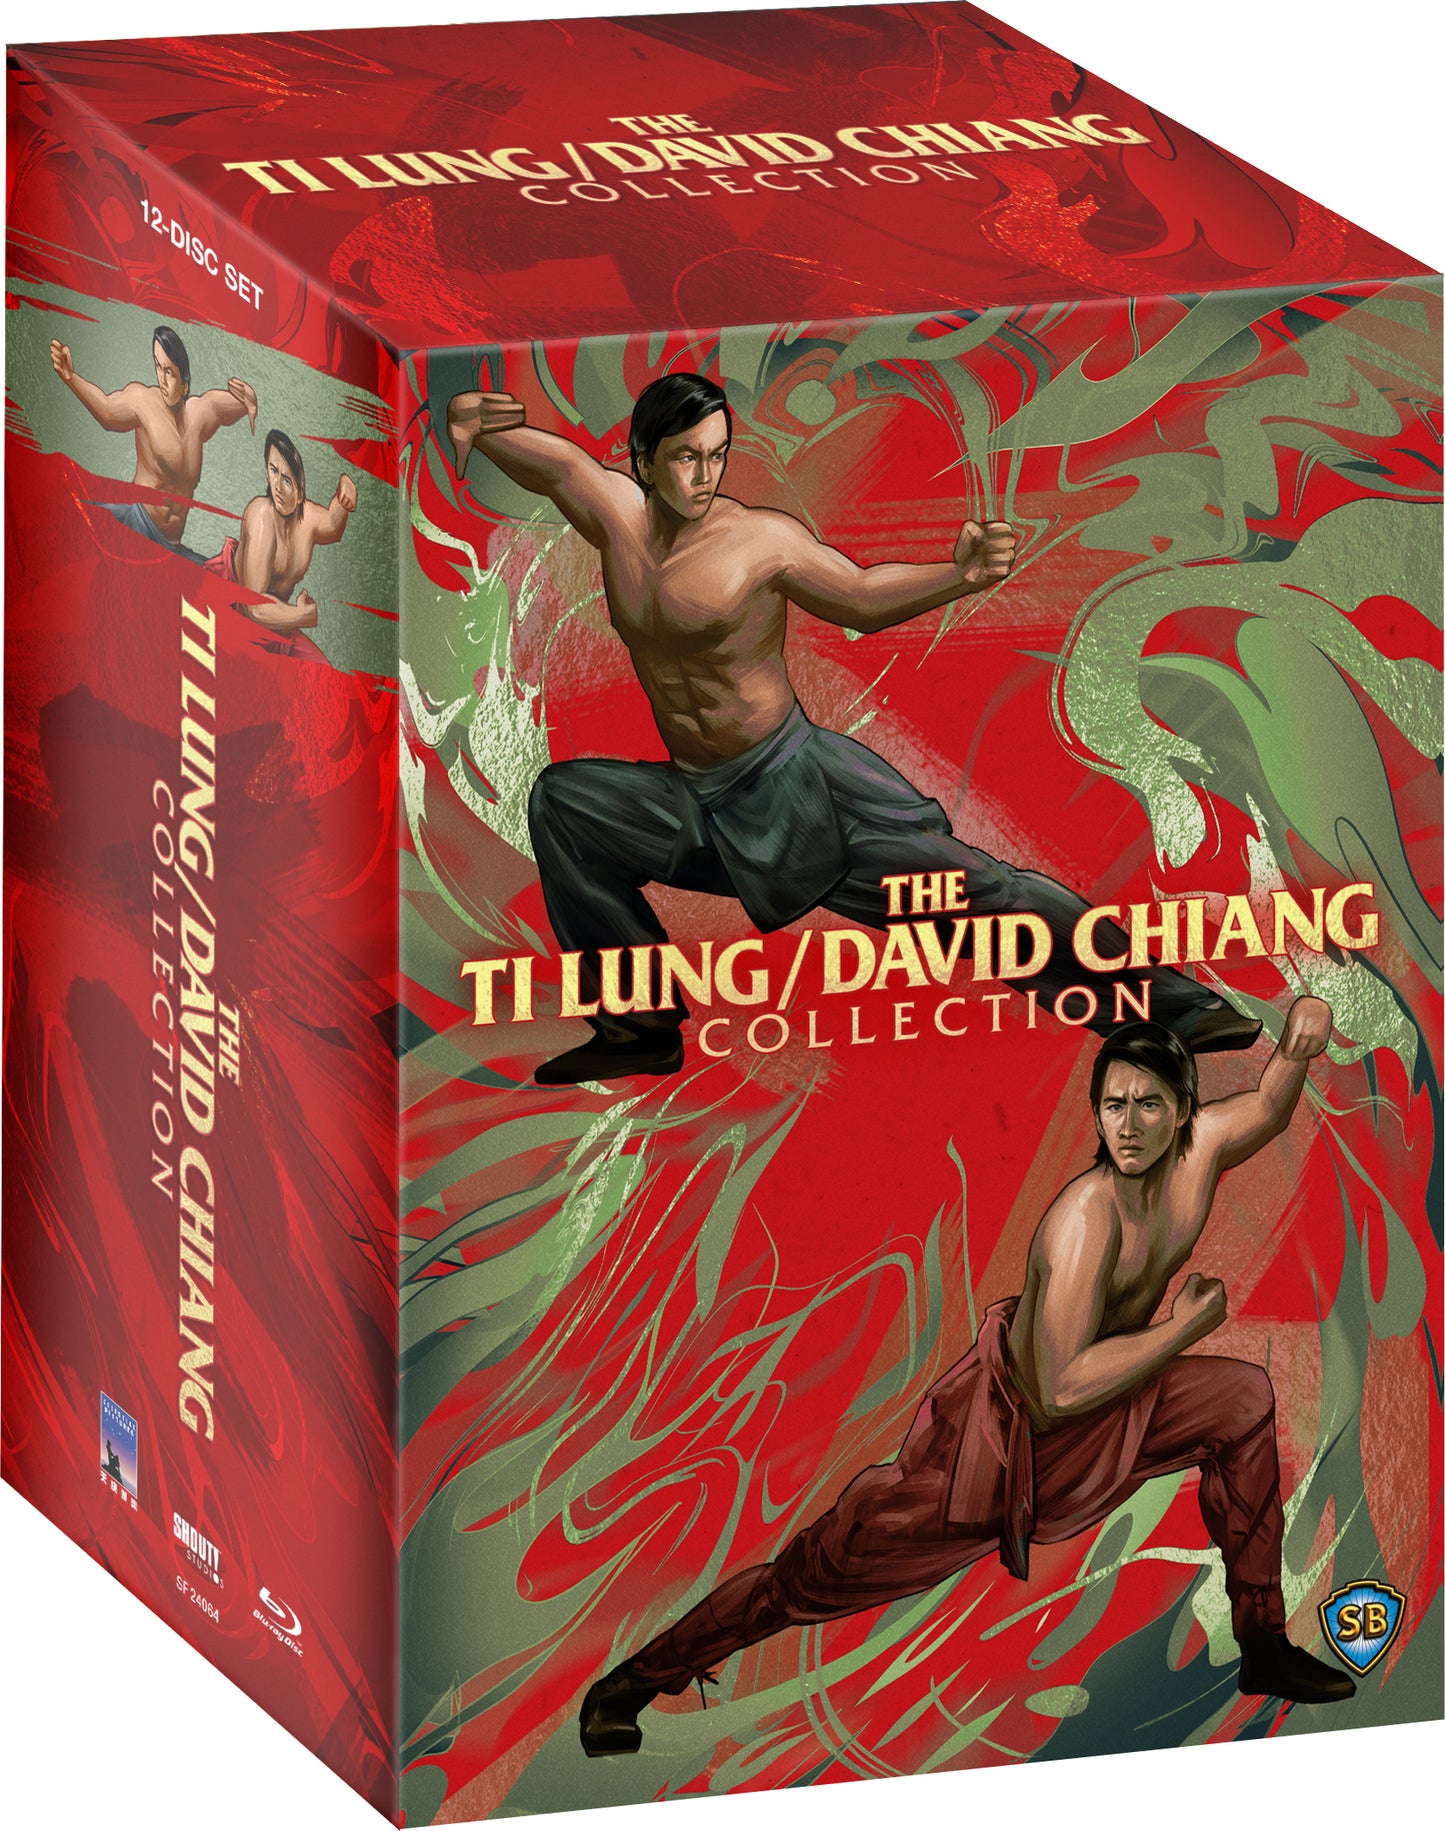 The Ti Lung / David Chiang Collection: Limited Editon w/ Poster (Exclusive)